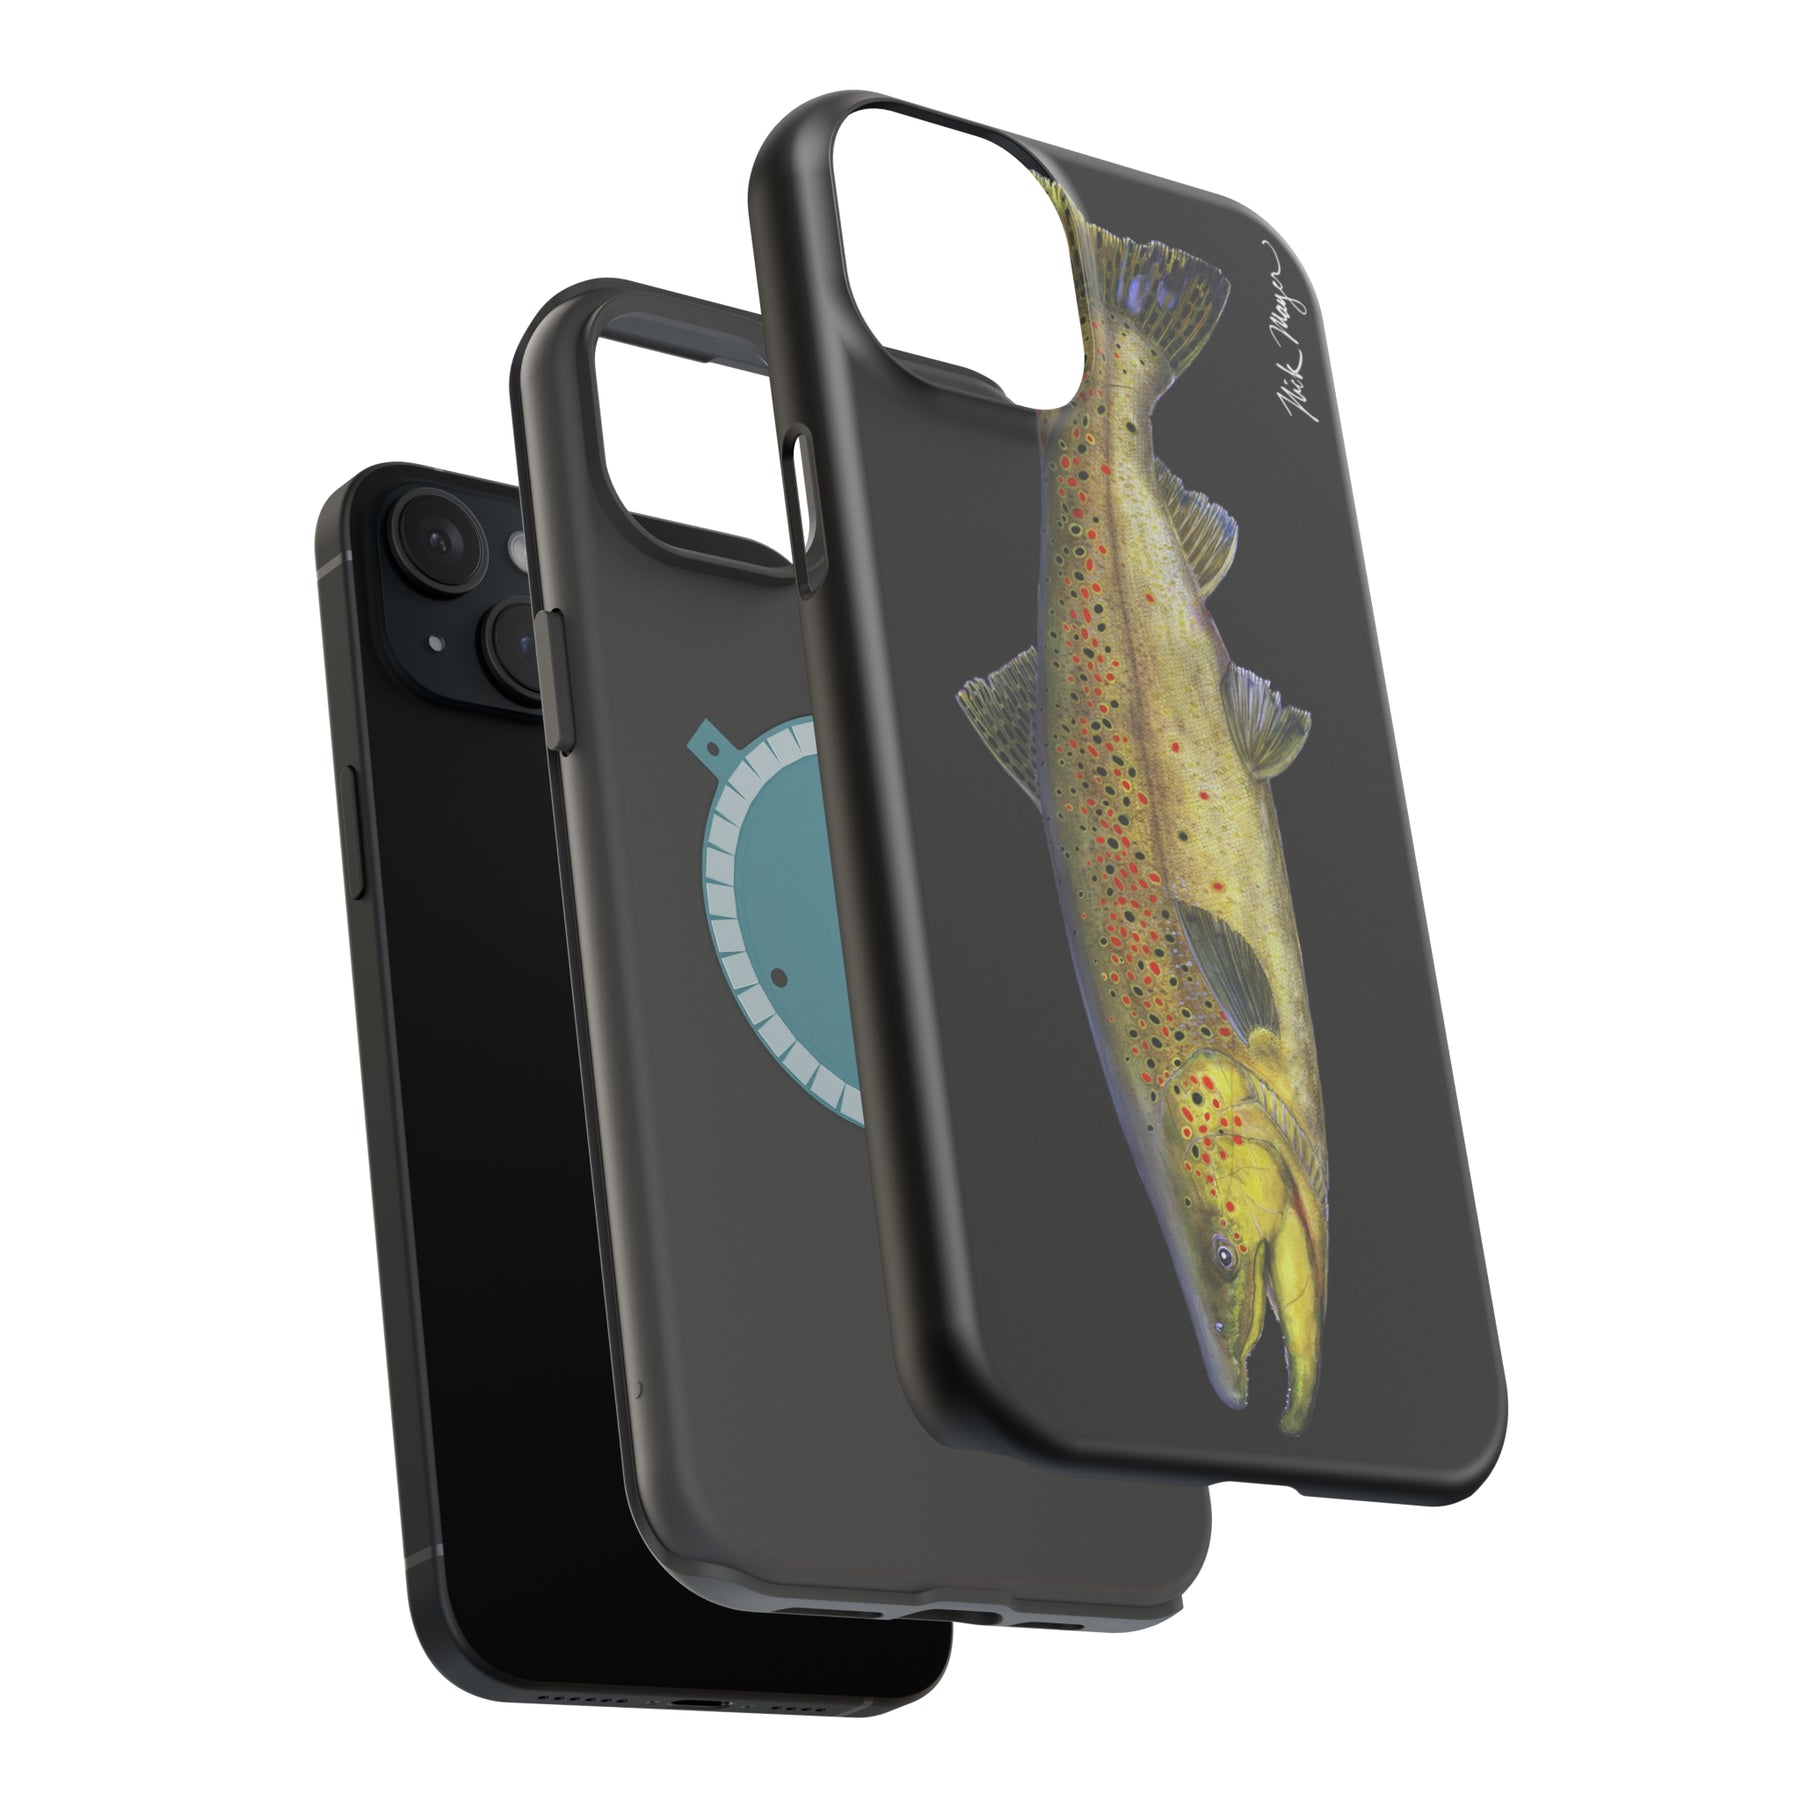 Brown Trout MagSafe Black iPhone Case